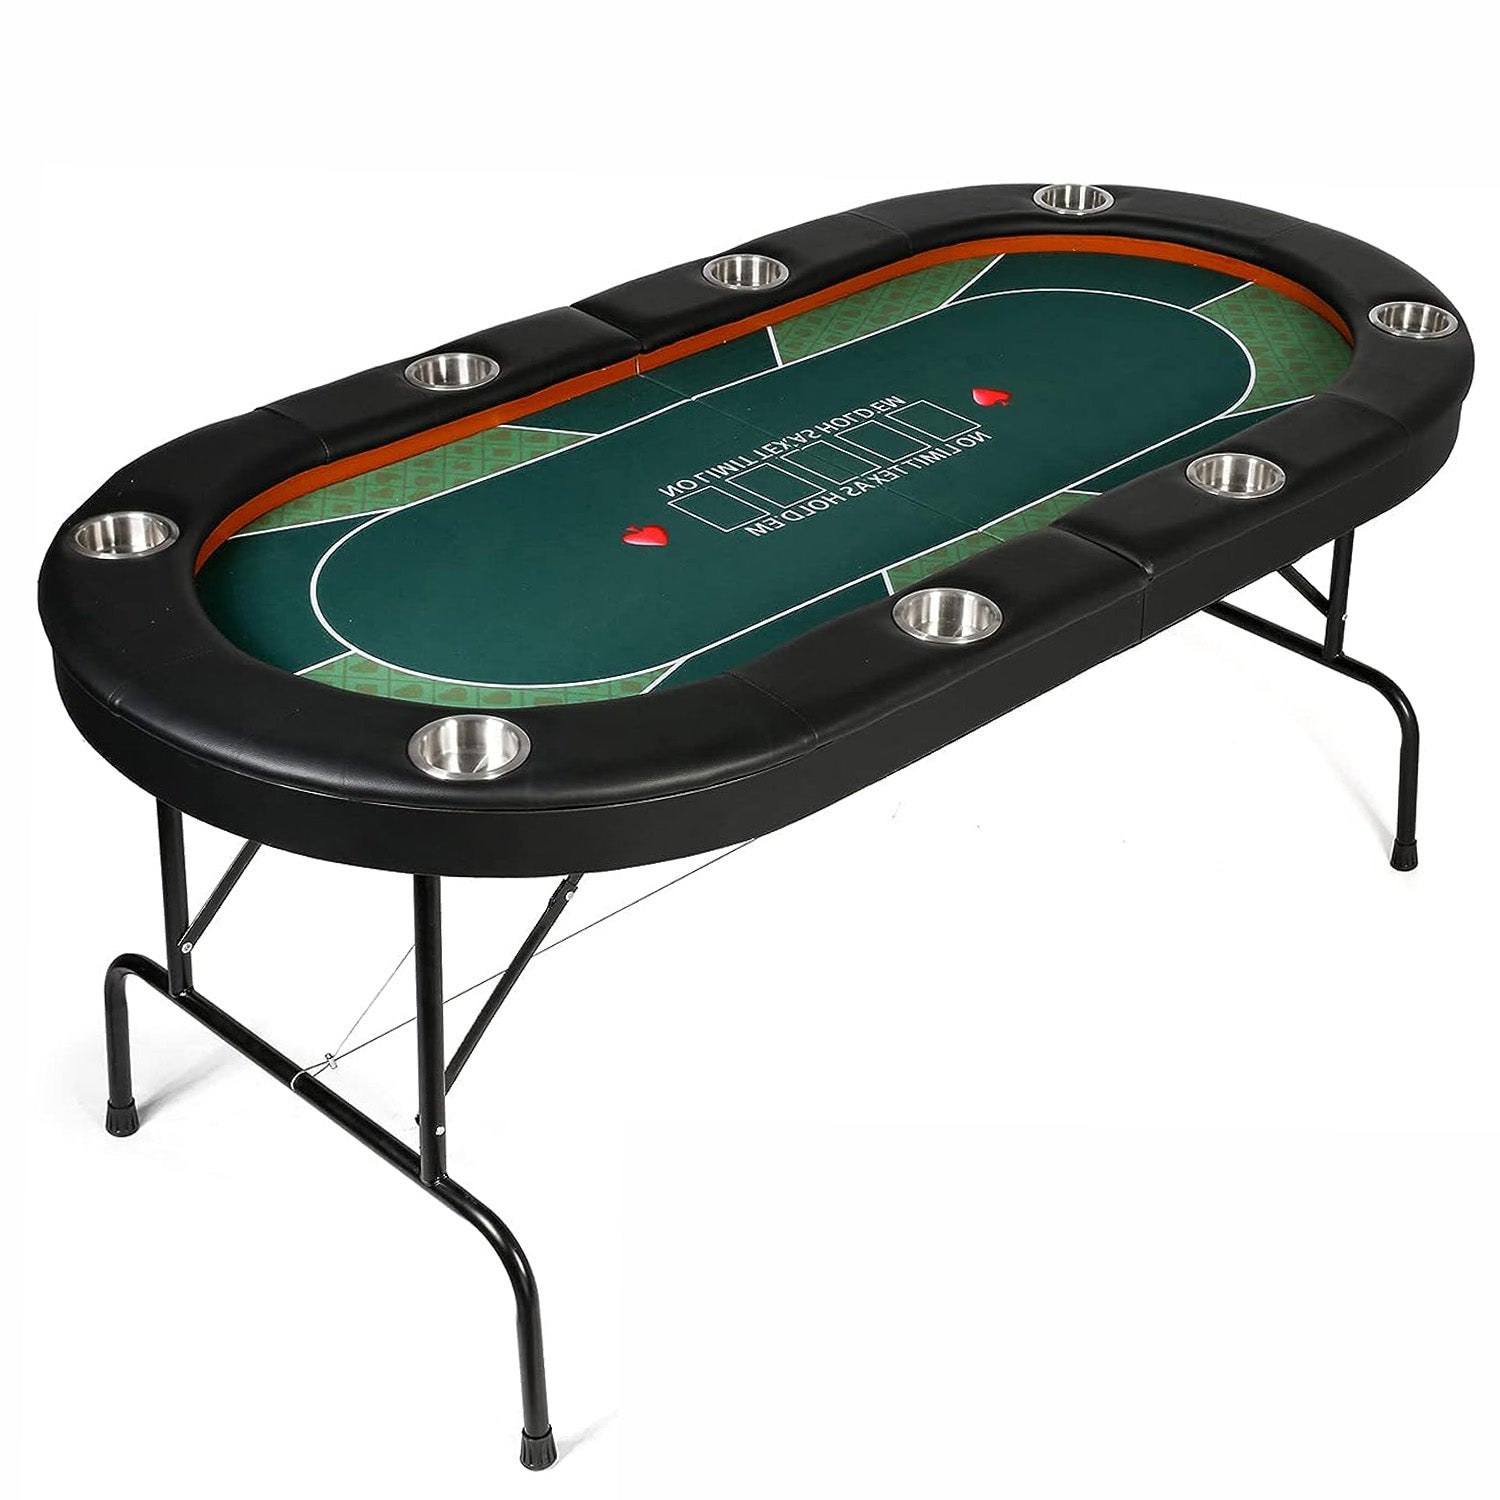 LUCKYERMORE 70.8" Folding Poker Table 8 Player Card Table with 8 Cup Holder for Texas Casino, Green